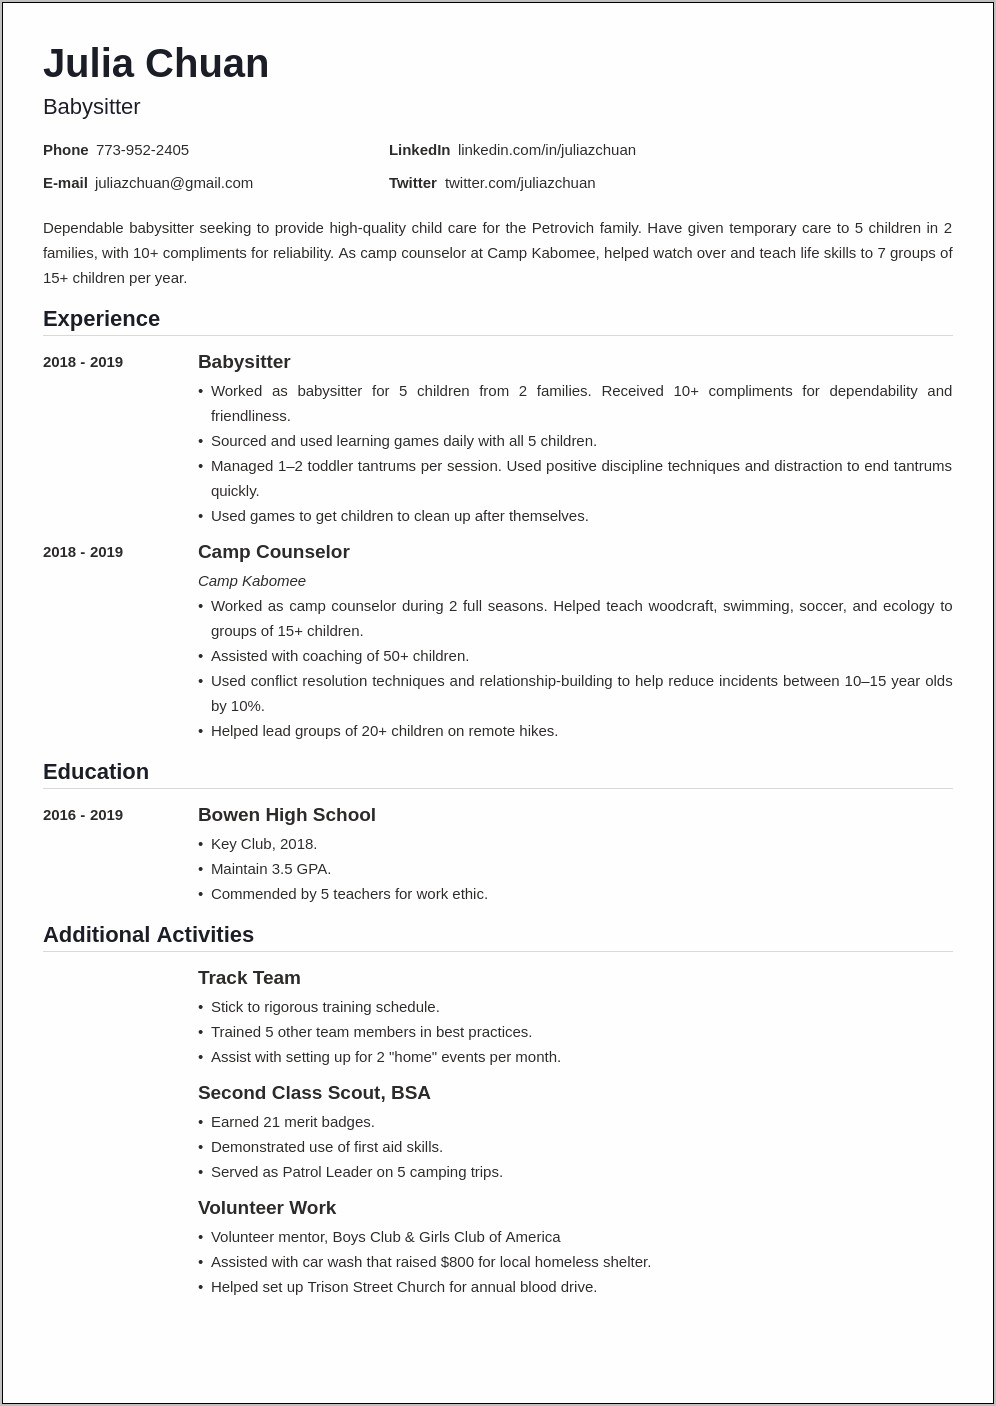 Home Health Care Resume Work Experience